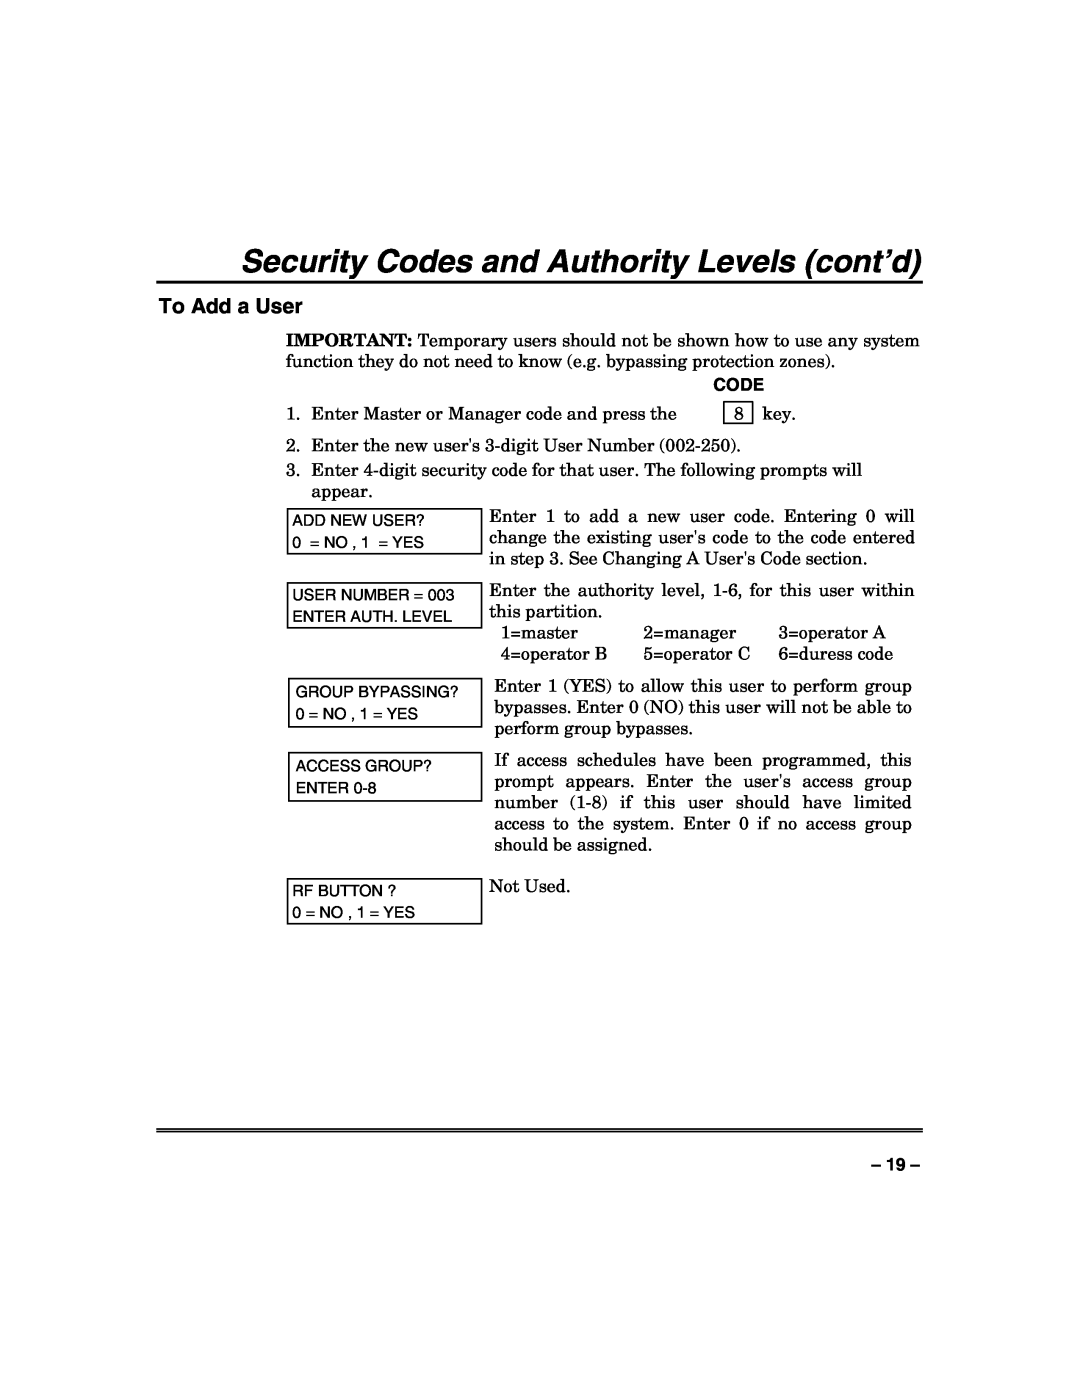 Honeywell VISTA-128FBP, VISTA-250FBP manual To Add a User, Security Codes and Authority Levels cont’d 